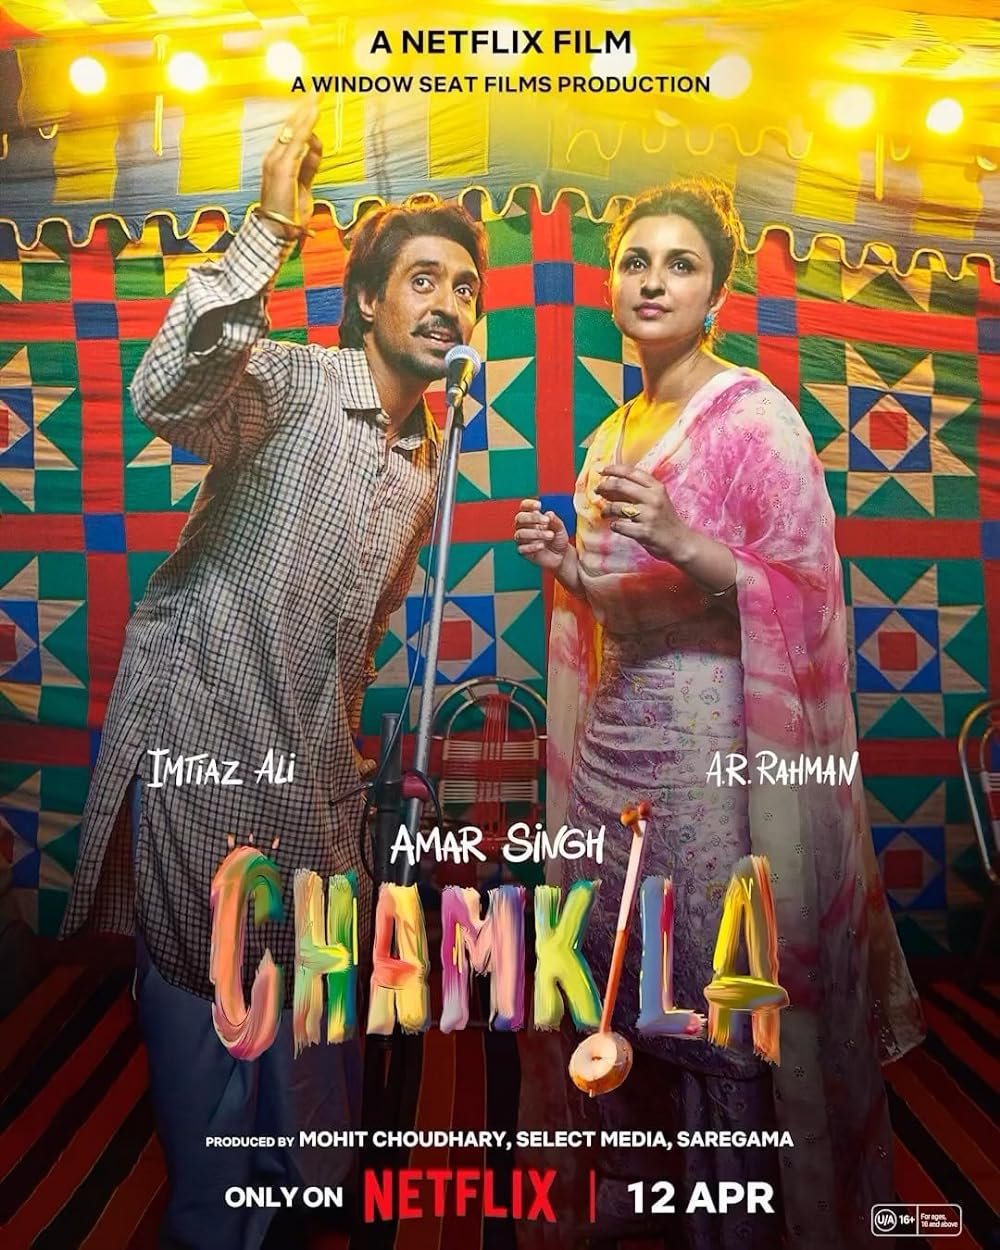 Amar Singh Chamkila (April 12, Netflix)Step into the world of the legendary Punjabi singer in 'Amar Singh Chamkila,' a biopic exploring his rapid rise to fame, provocative songs, and tragic demise. Directed by Imtiaz Ali and starring Diljit Dosanjh, the film sheds light on the complex dynamics of Chamkila's personal and professional life.